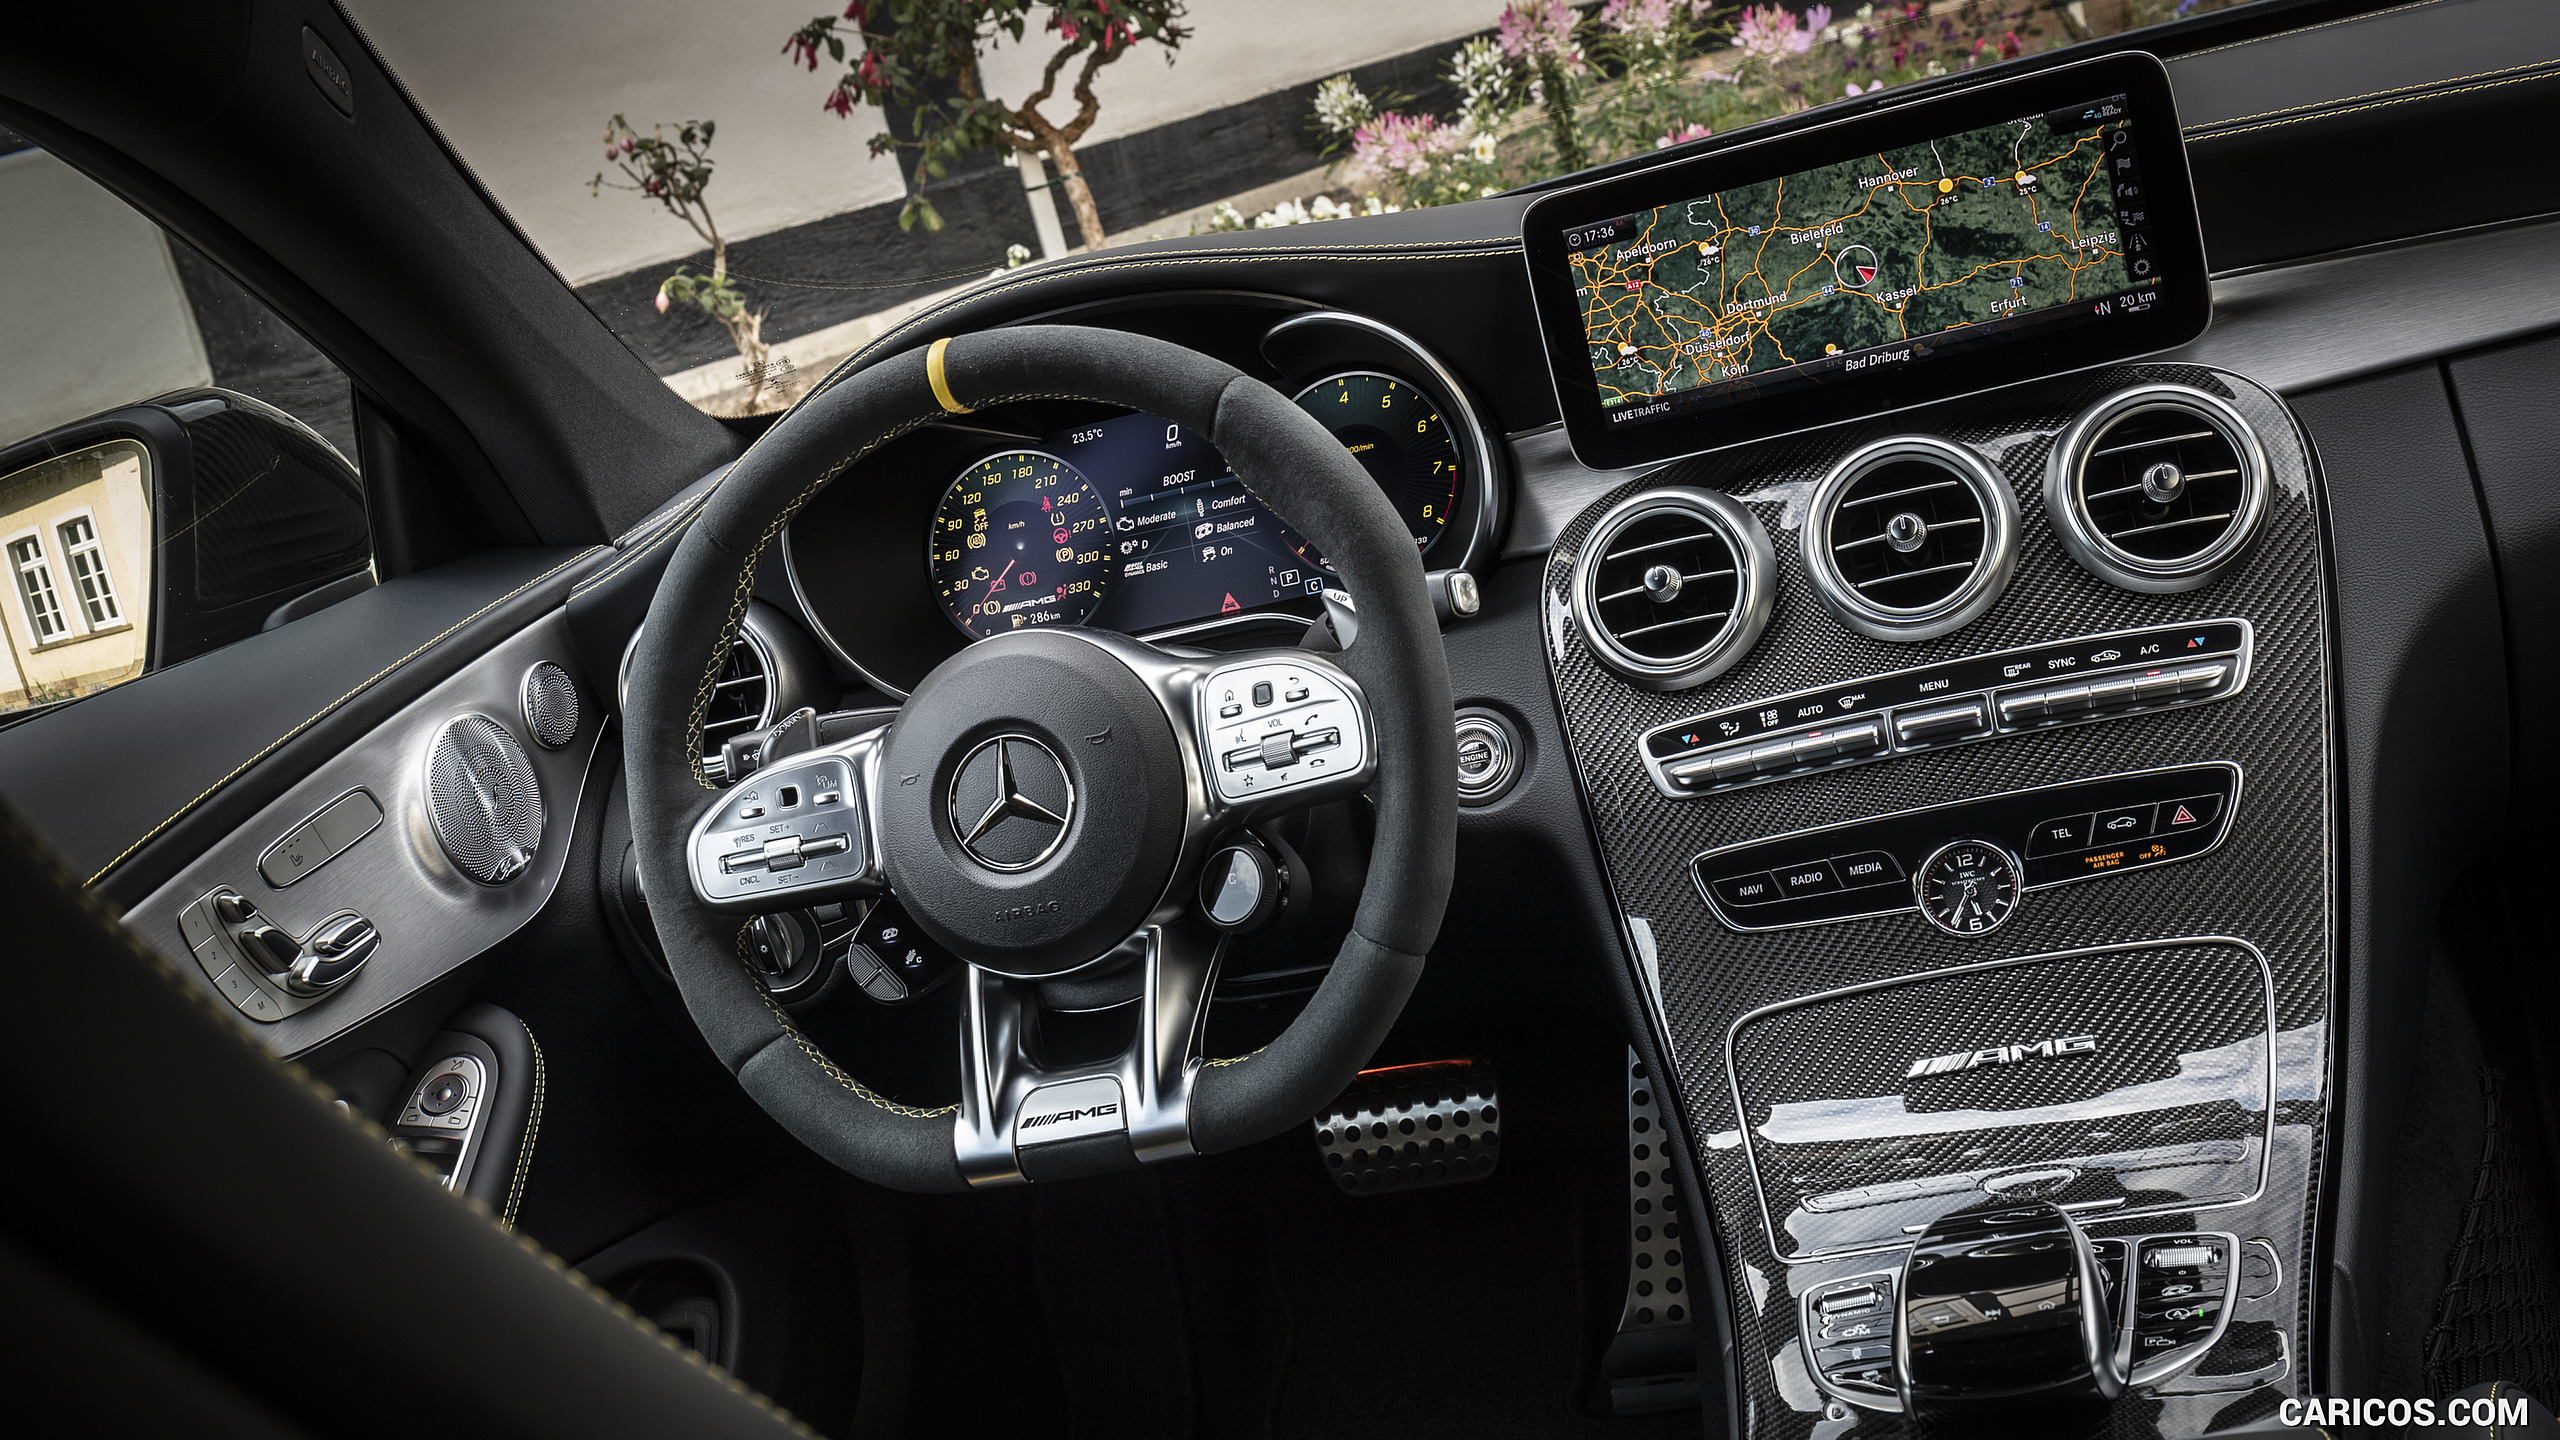 2019 Mercedes-AMG C 63 S Coupe - Interior, #91 of 106